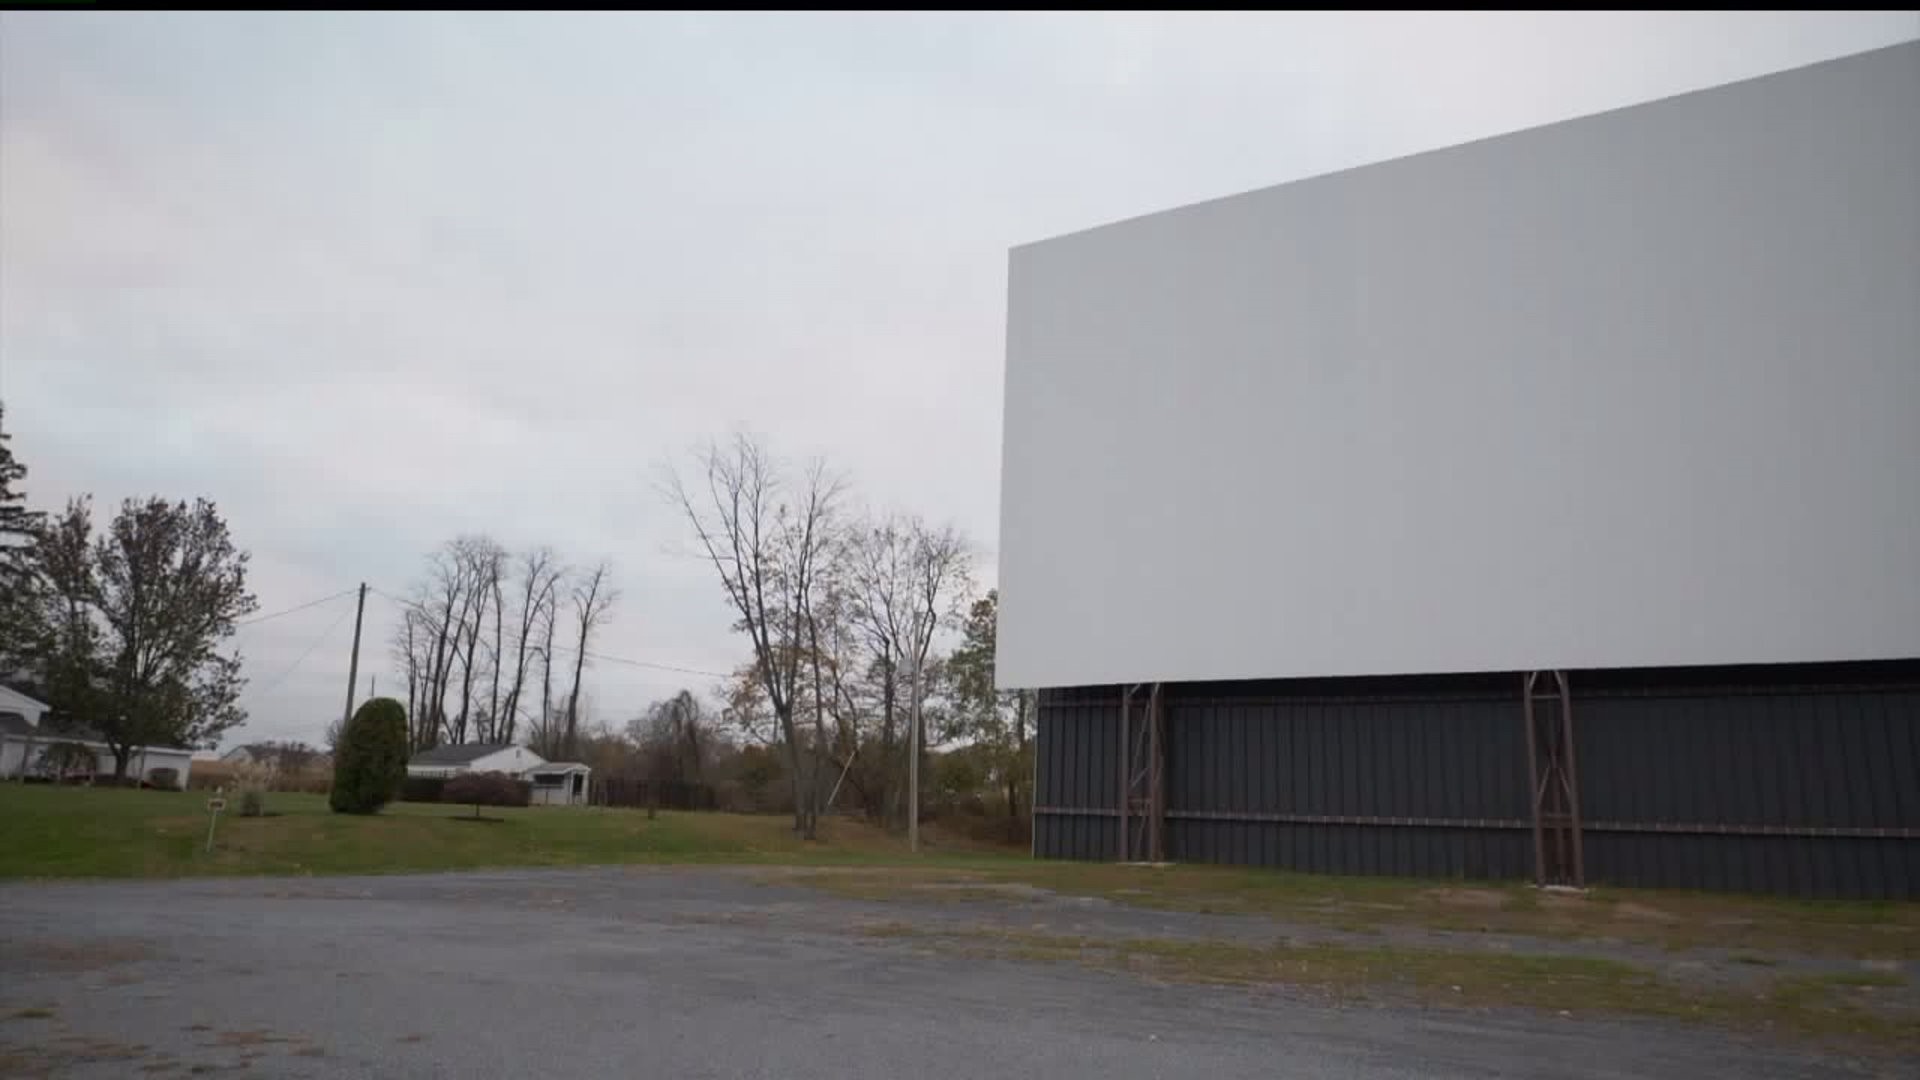 Future of beloved York County drive-in theatre uncertain